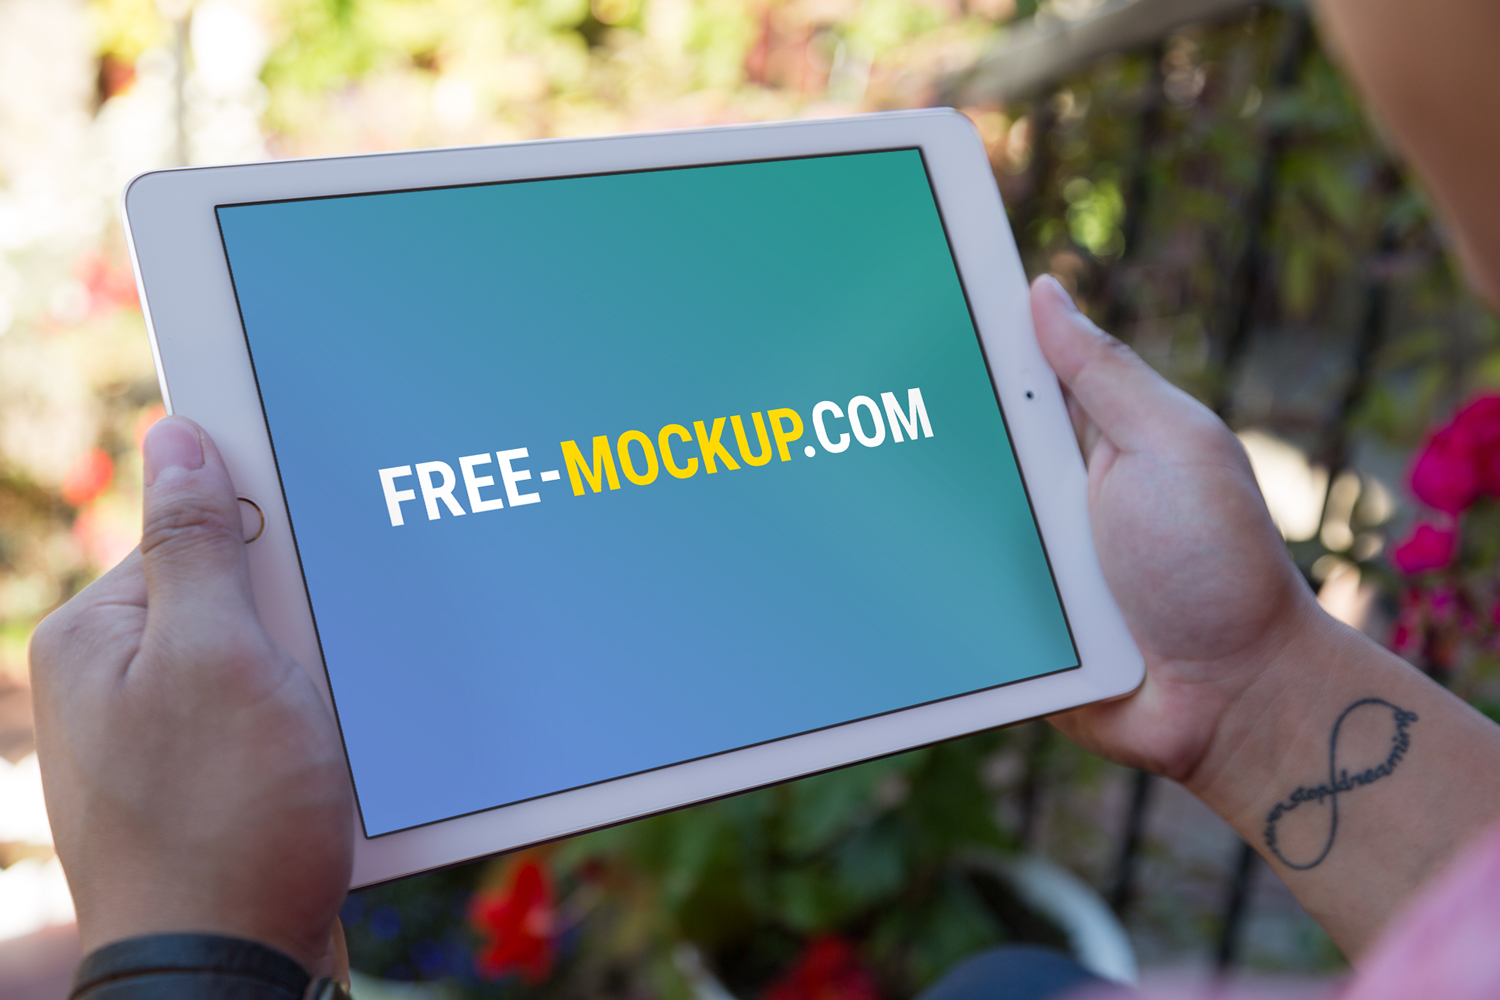 Apple-Devices-Mockup-Free-03